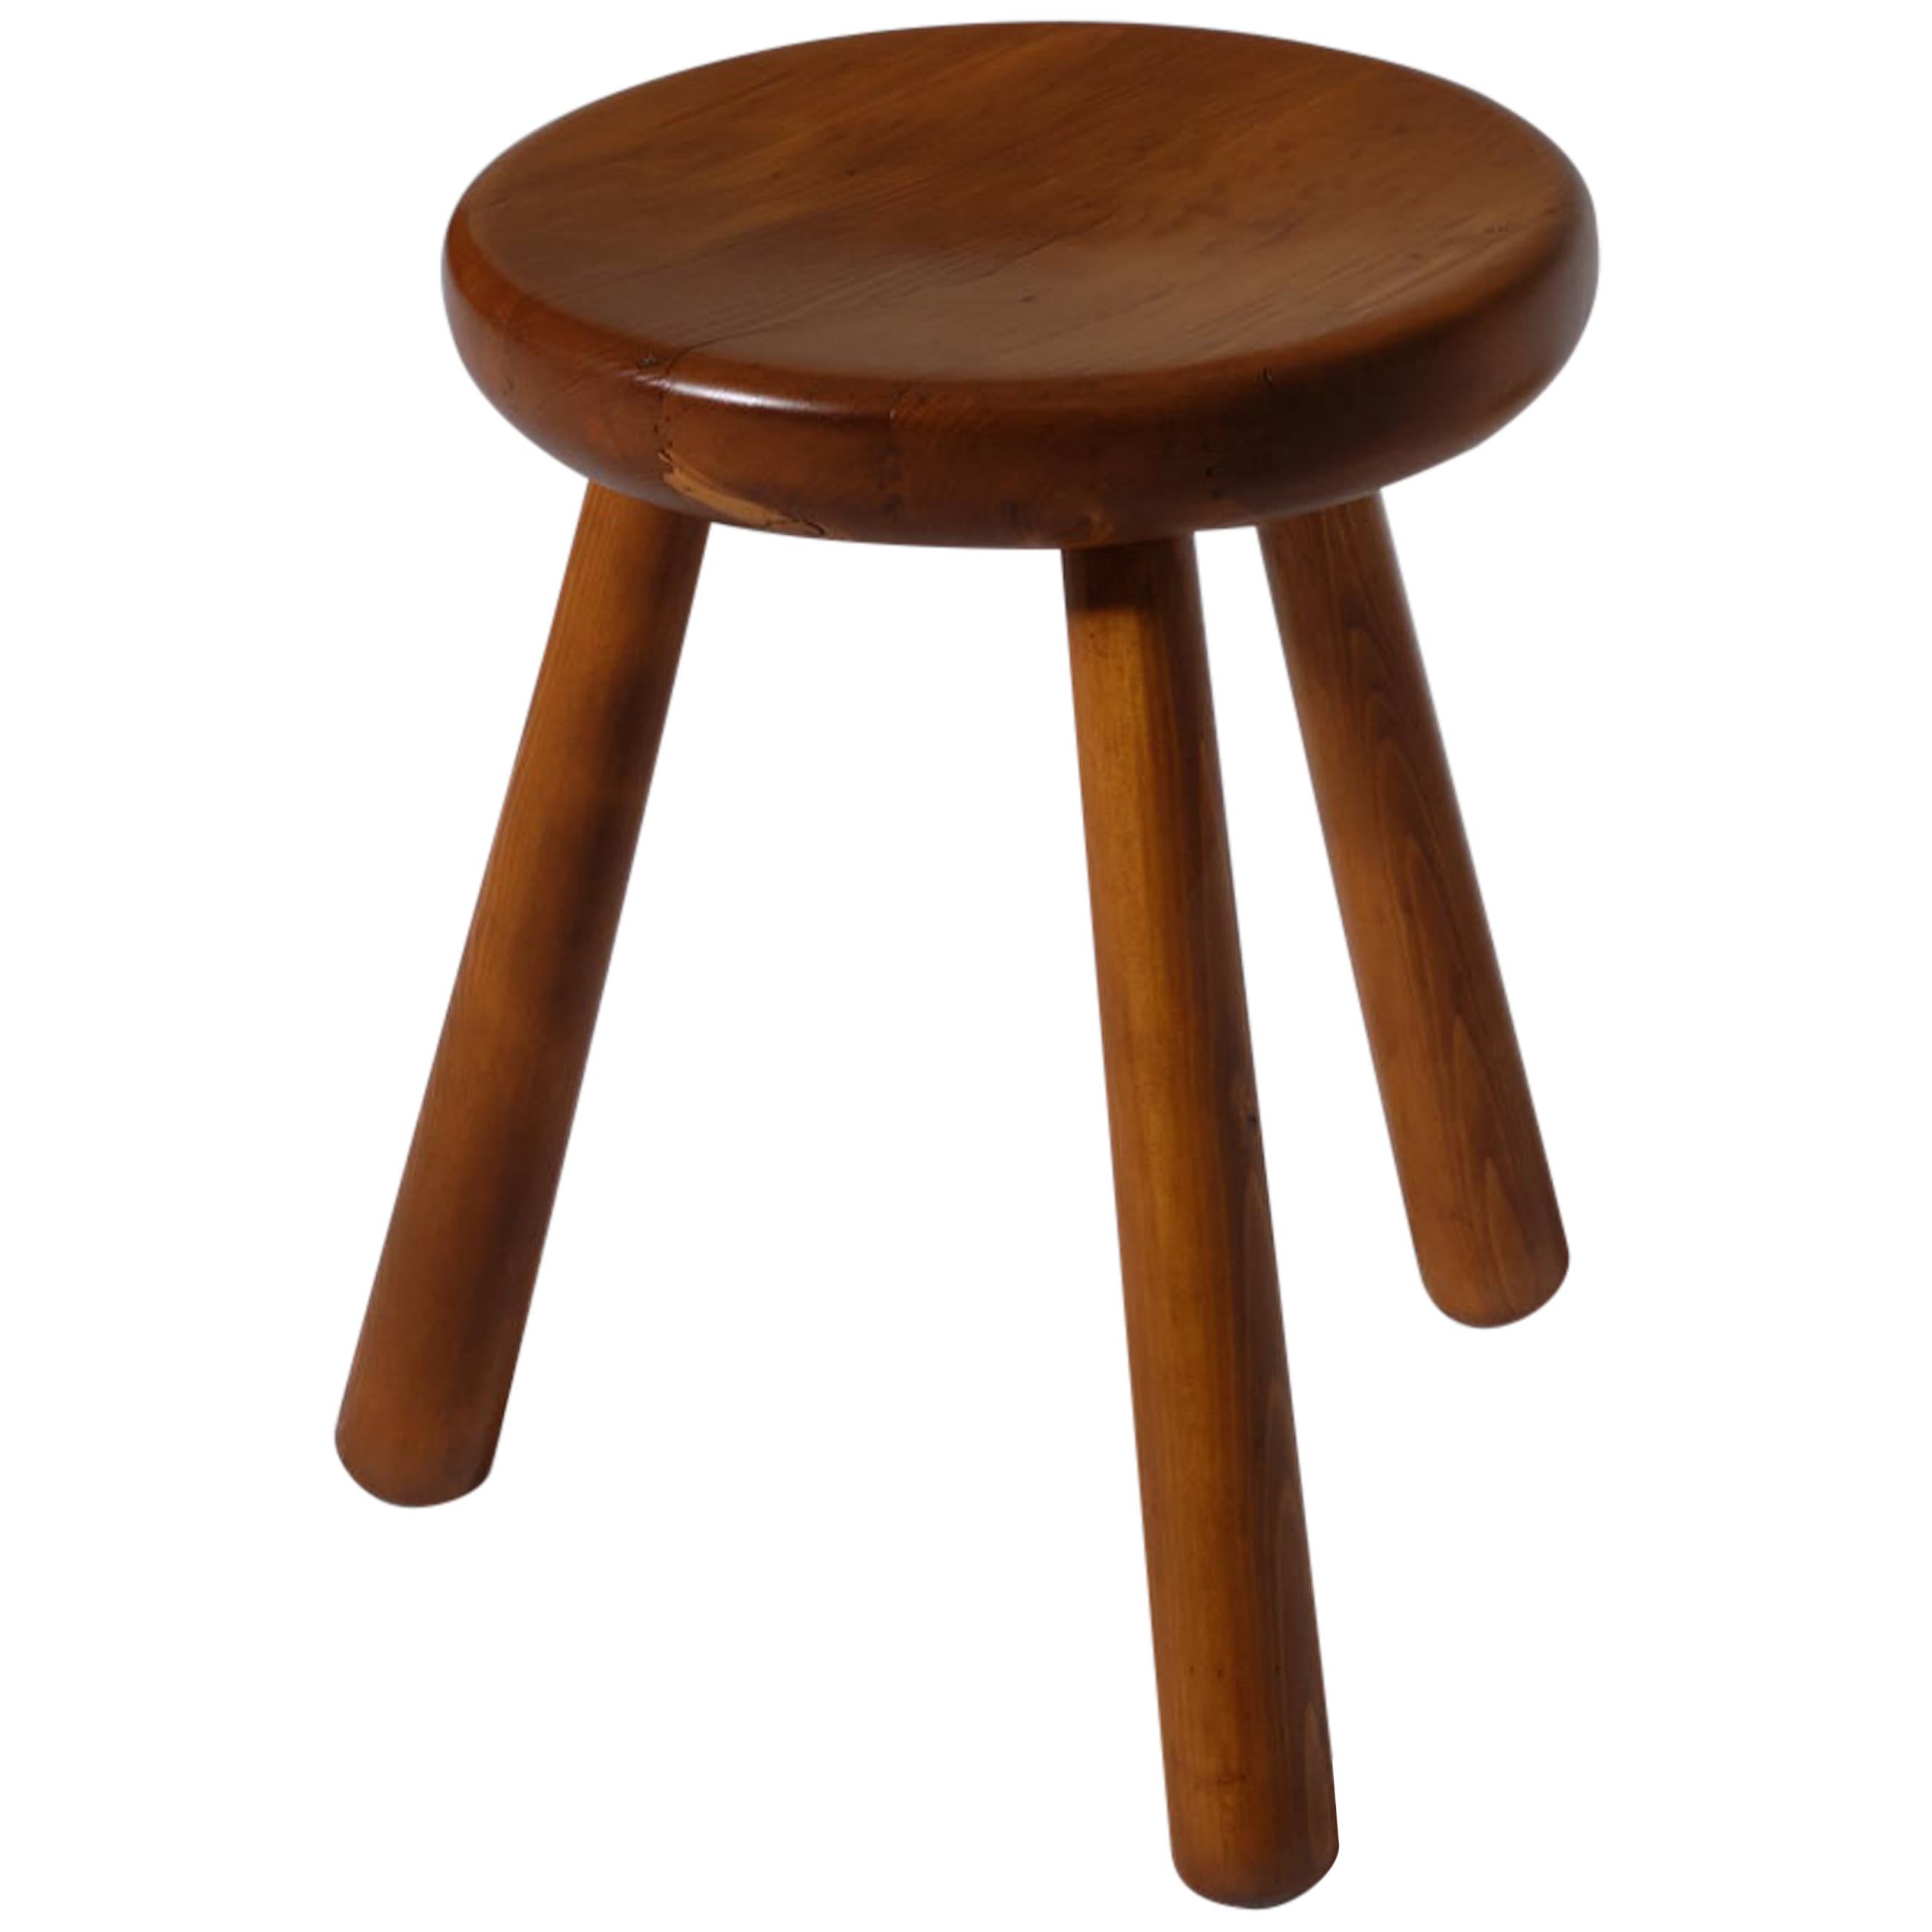 French Mid-Century Modern Stool in Solid Pine